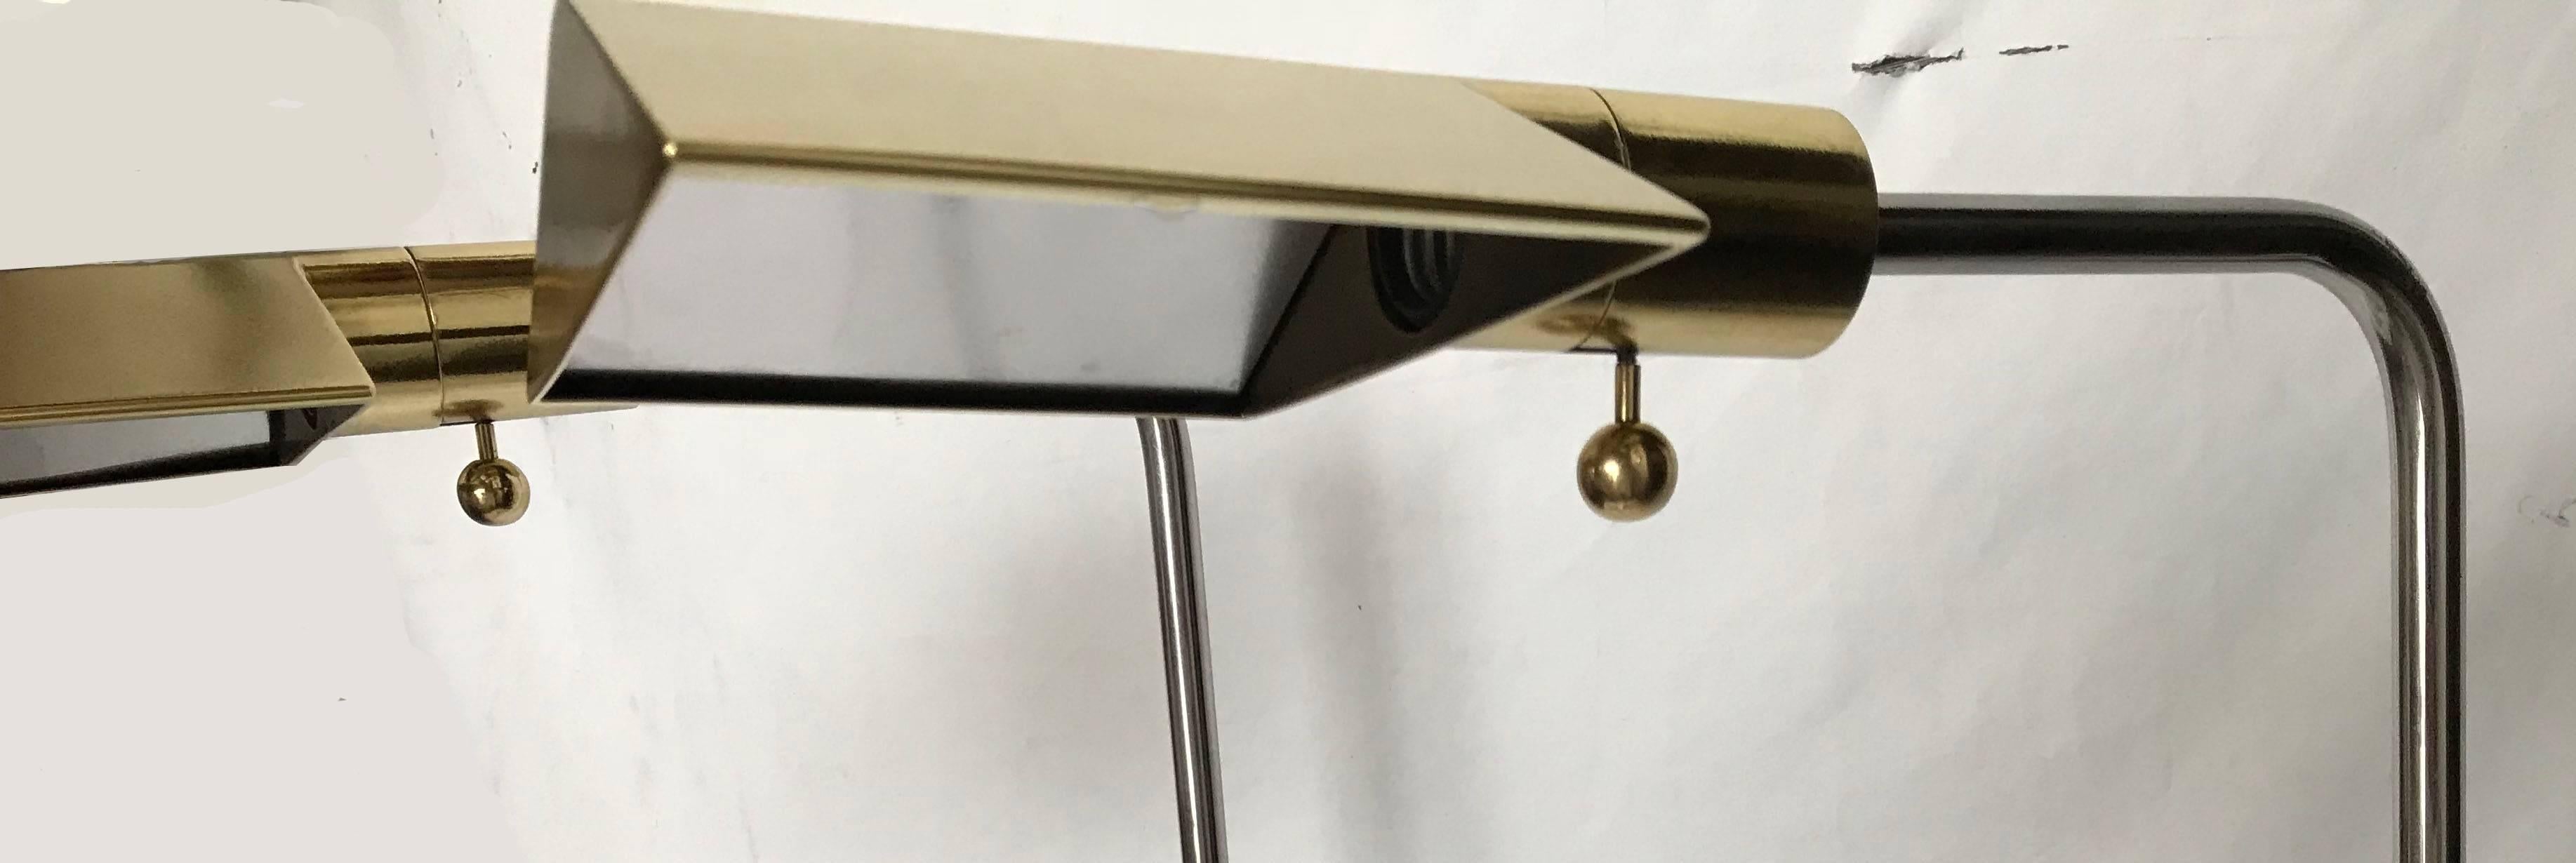 Pair of brass and chrome Cedric Hartman floor lamp.
Perfect condition 
80 watt bulb
Wired for US and in working condition
Measure: foot 11:L, 1.5' D ,1